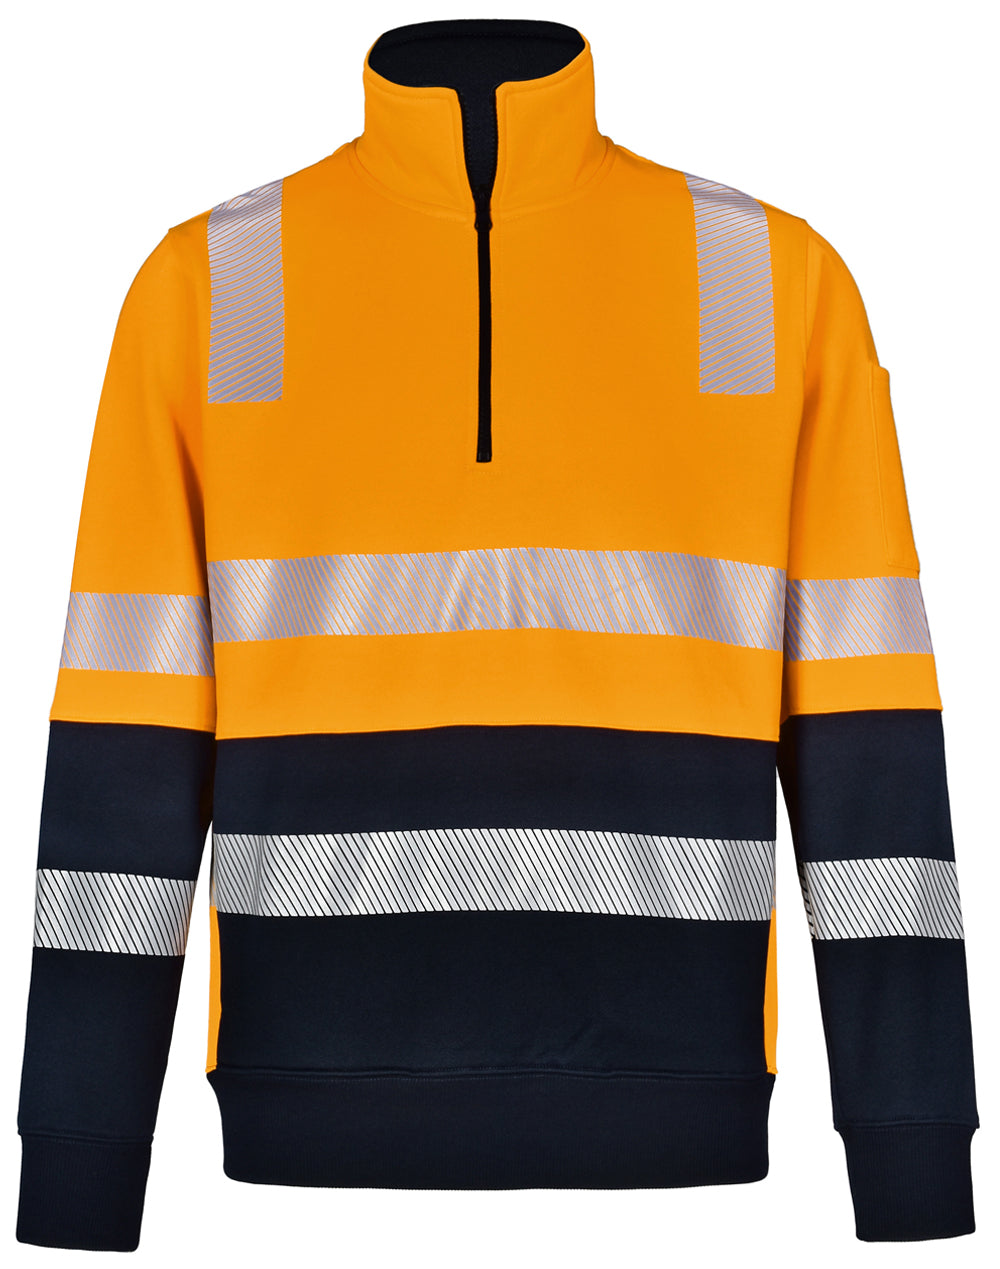 Vic Rail Half Zip Windcheater - made by AIW